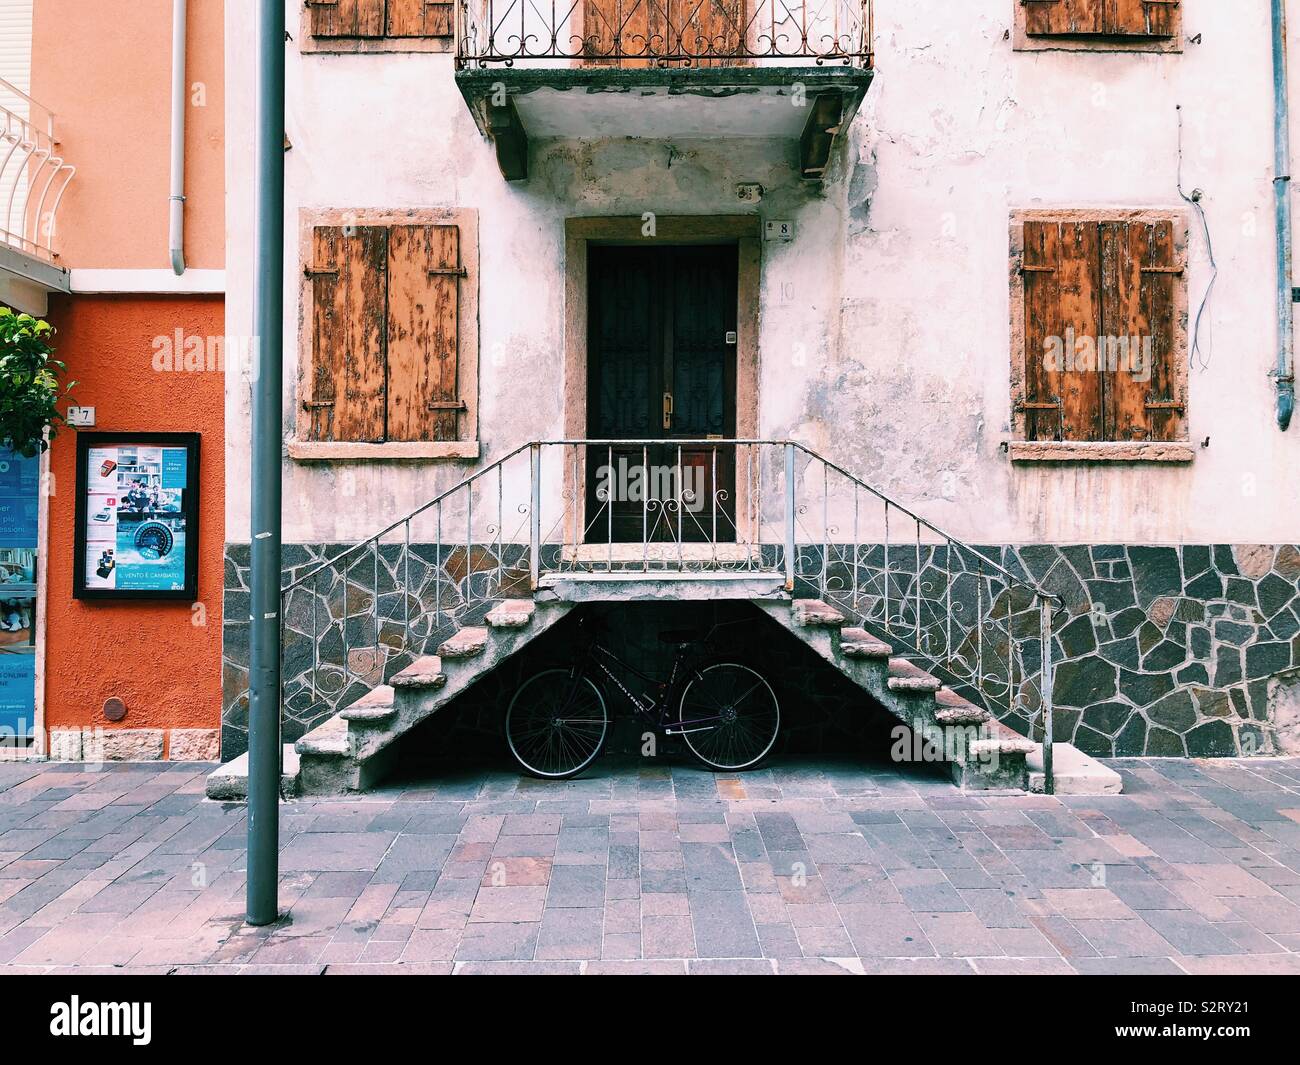 Bicycle under stairs in front of Italian building Stock Photo